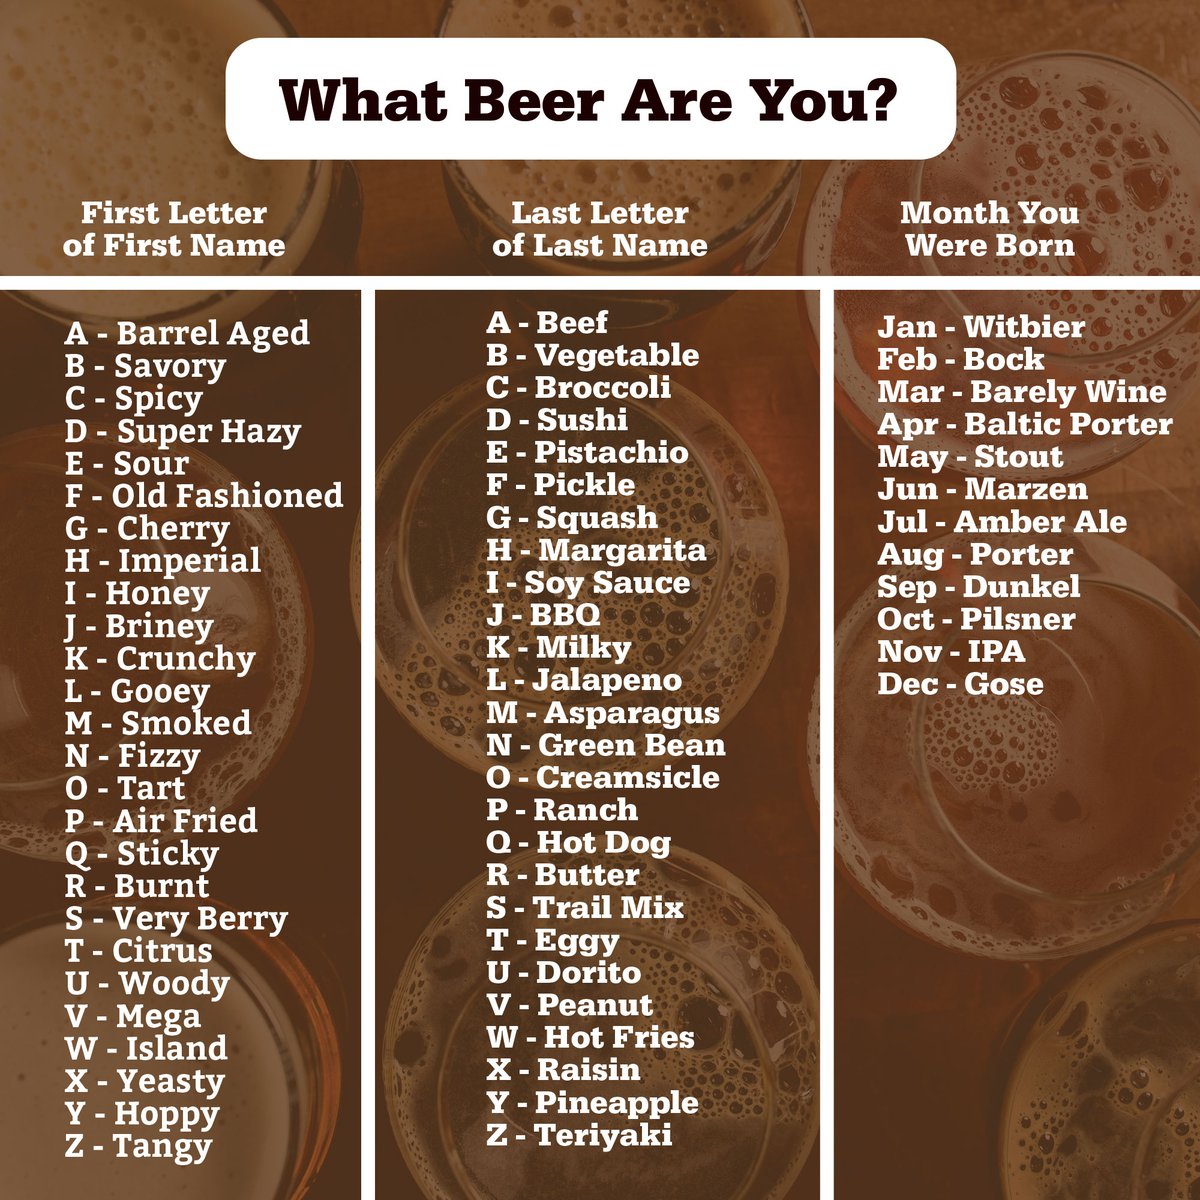 Comment below what beer you are!